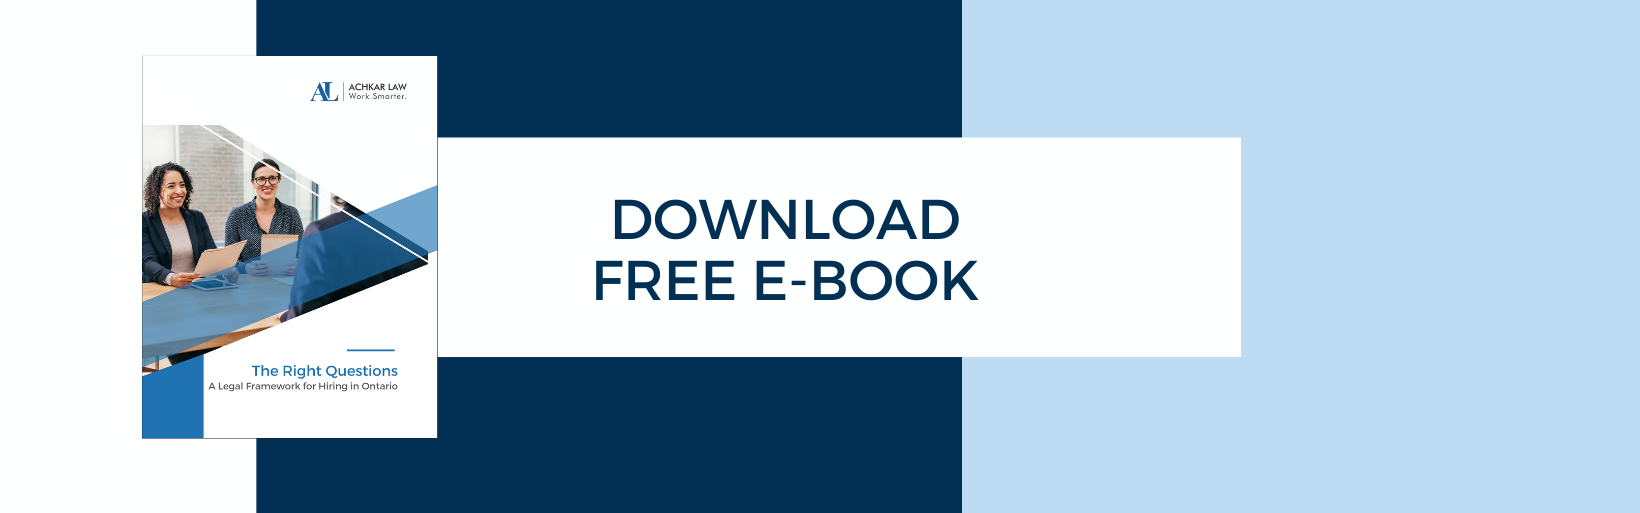 download free guide now (4)